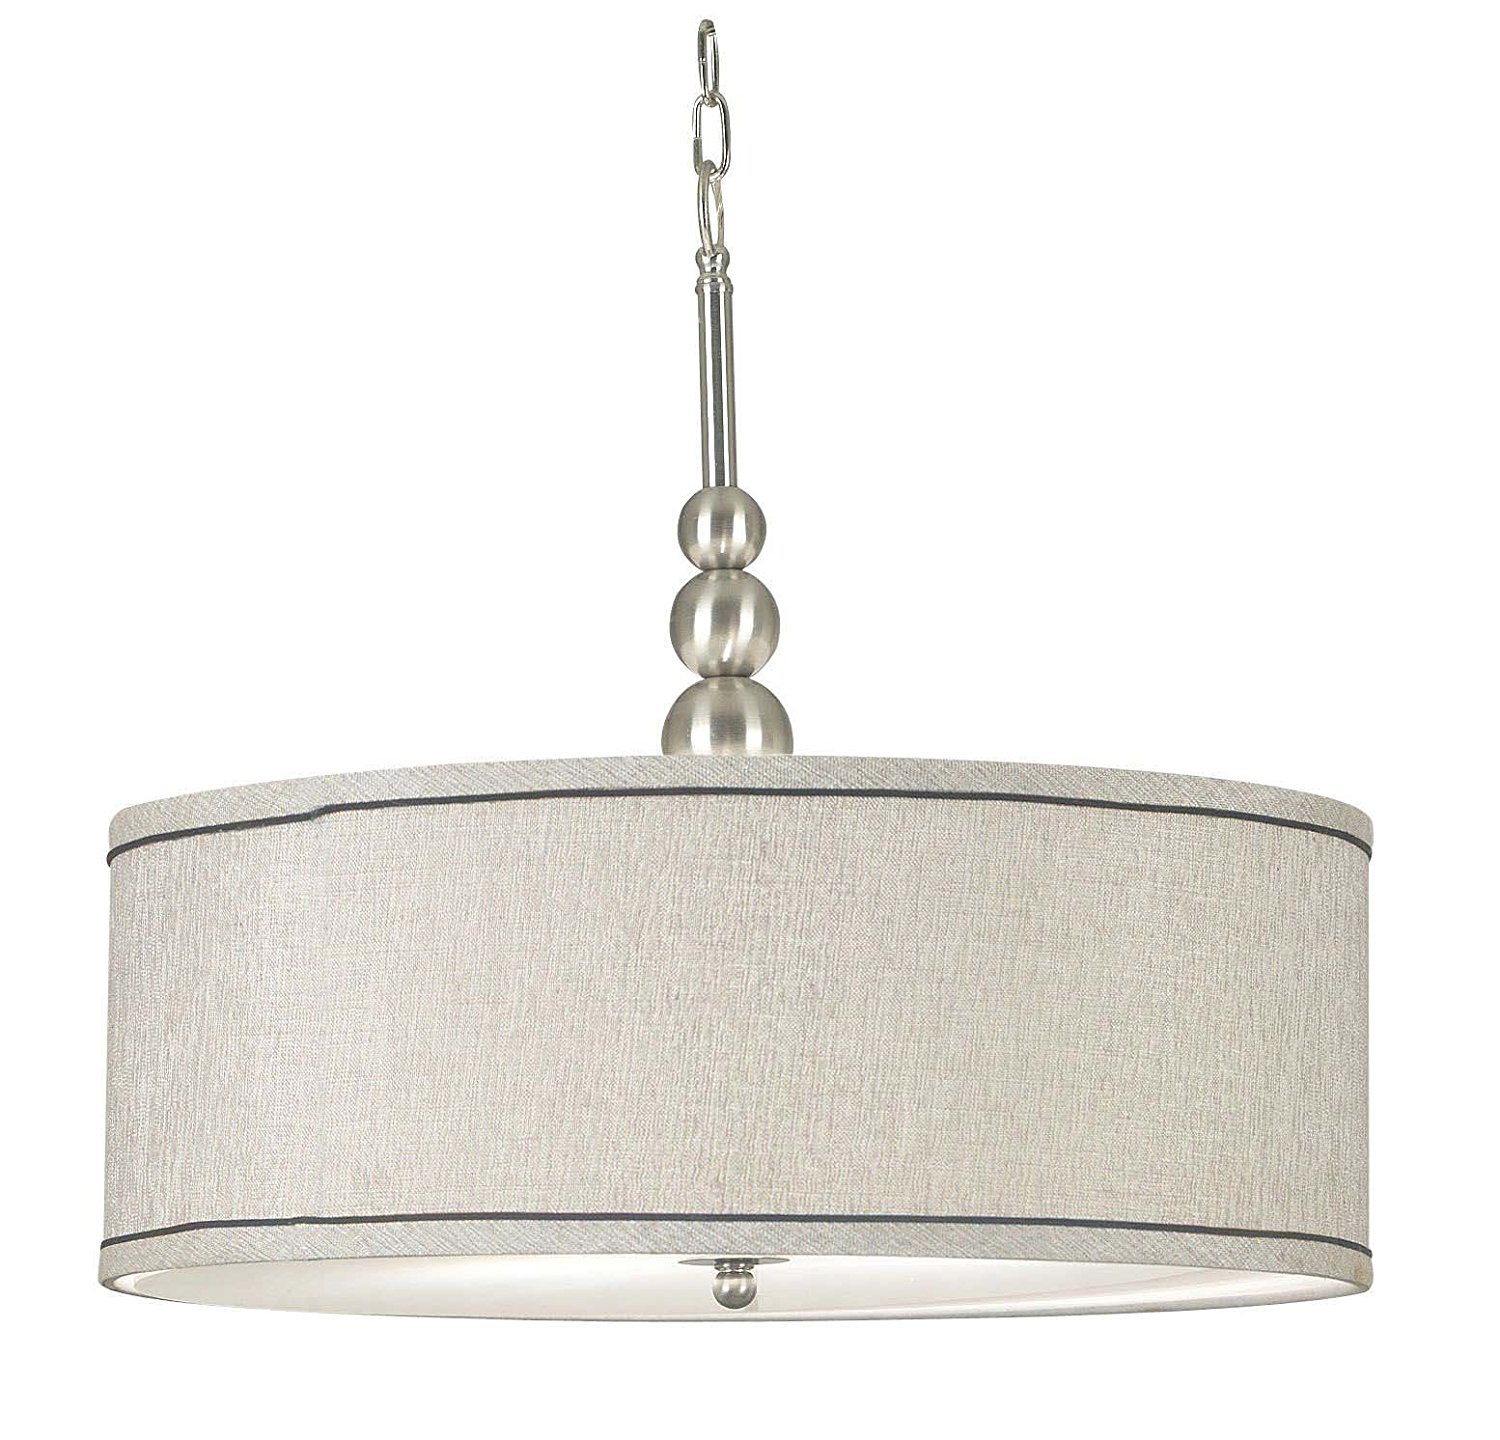 Kenroy Home 91640BS Margot 3-Light Pendant with Fabric Shade, Brushed Steel